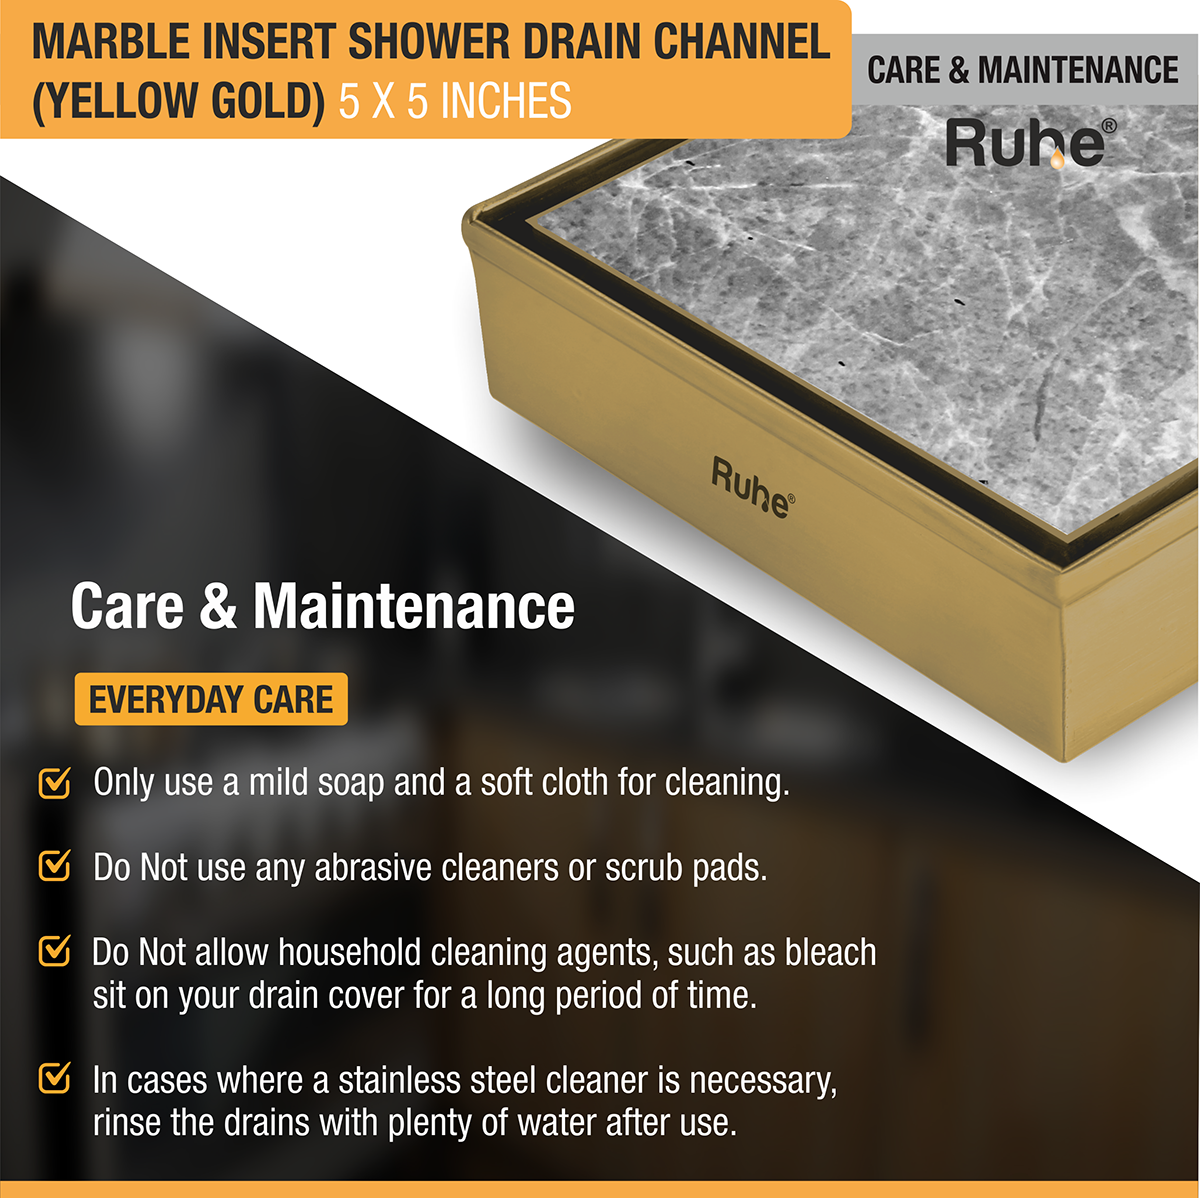 Marble Insert Shower Drain Channel (5 x 5 Inches) YELLOW GOLD PVD Coated care and maintenance